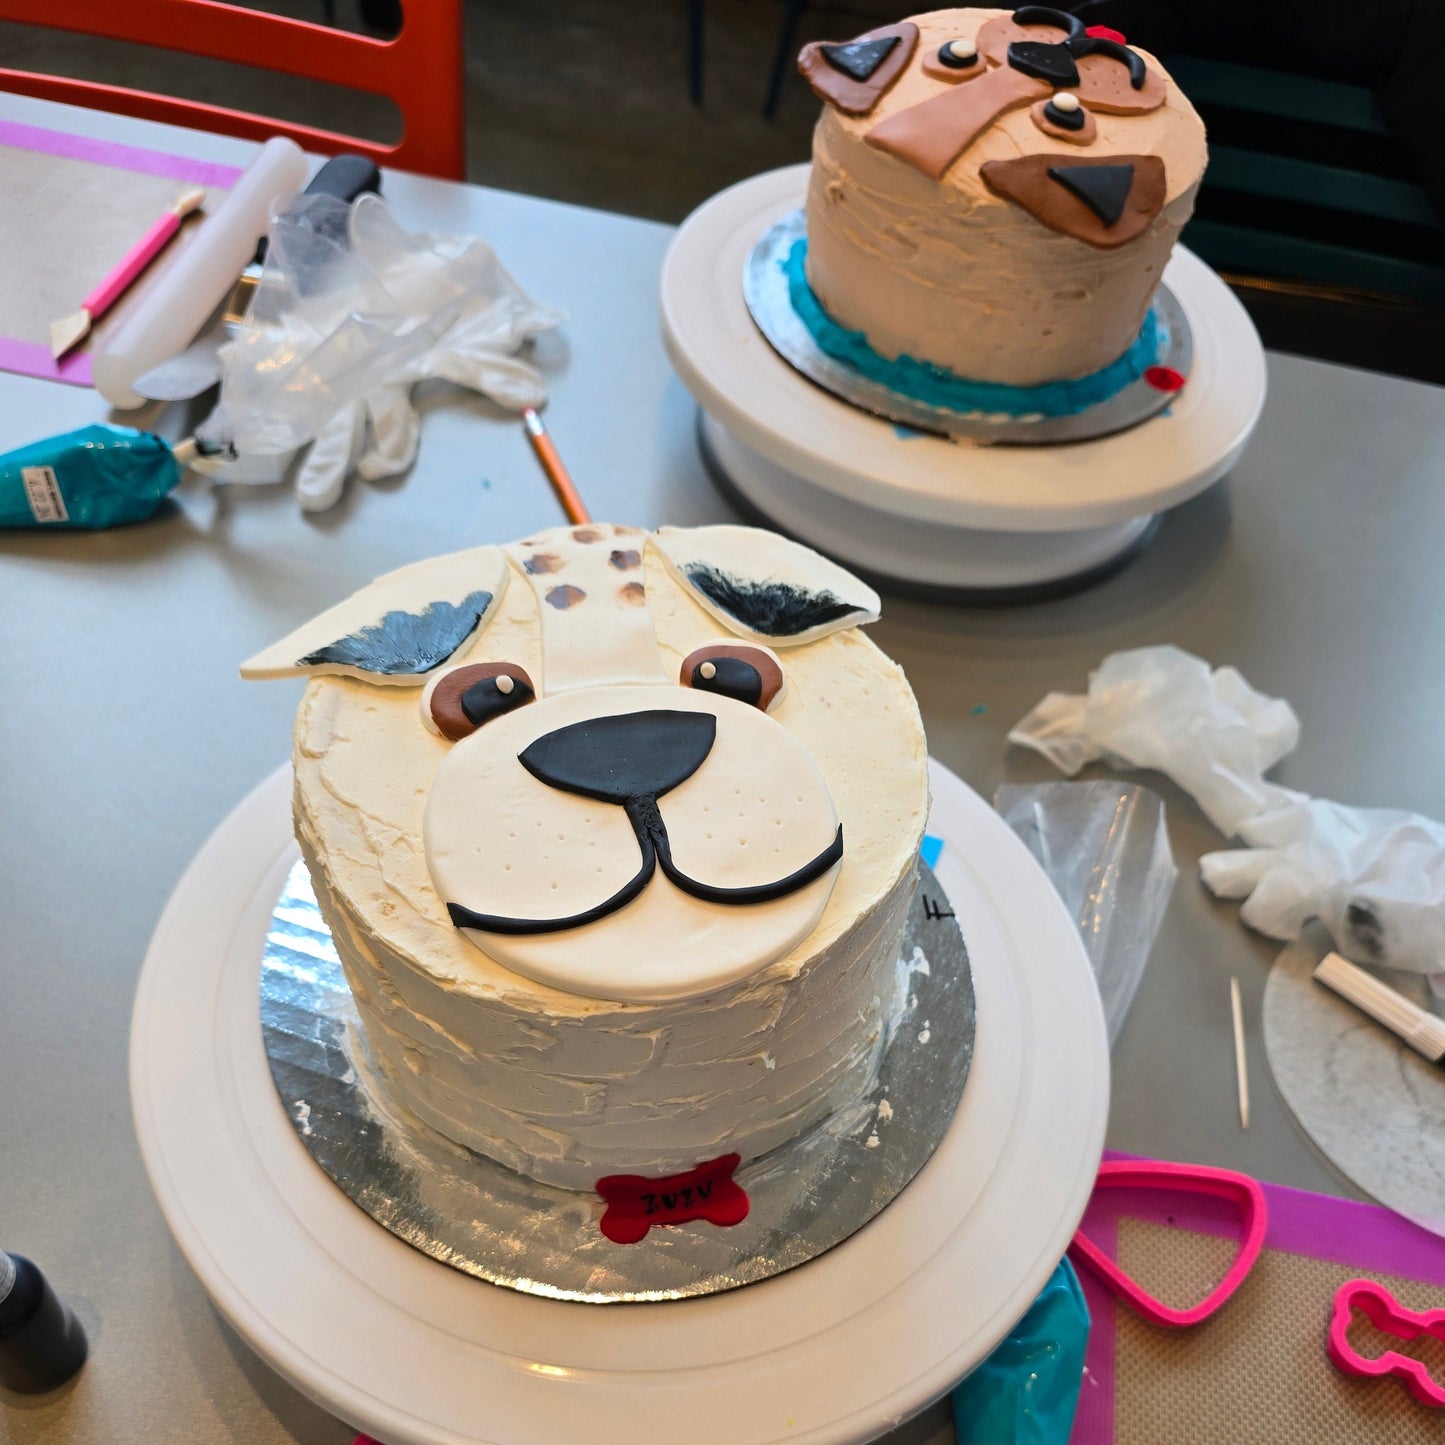 A white dog cake with the tips of its ears painted black, brown eyes, and a red bone name tag. Decorated by an attendee at a do-it-yourself cake-decorating workshop at Cake Hoopla.